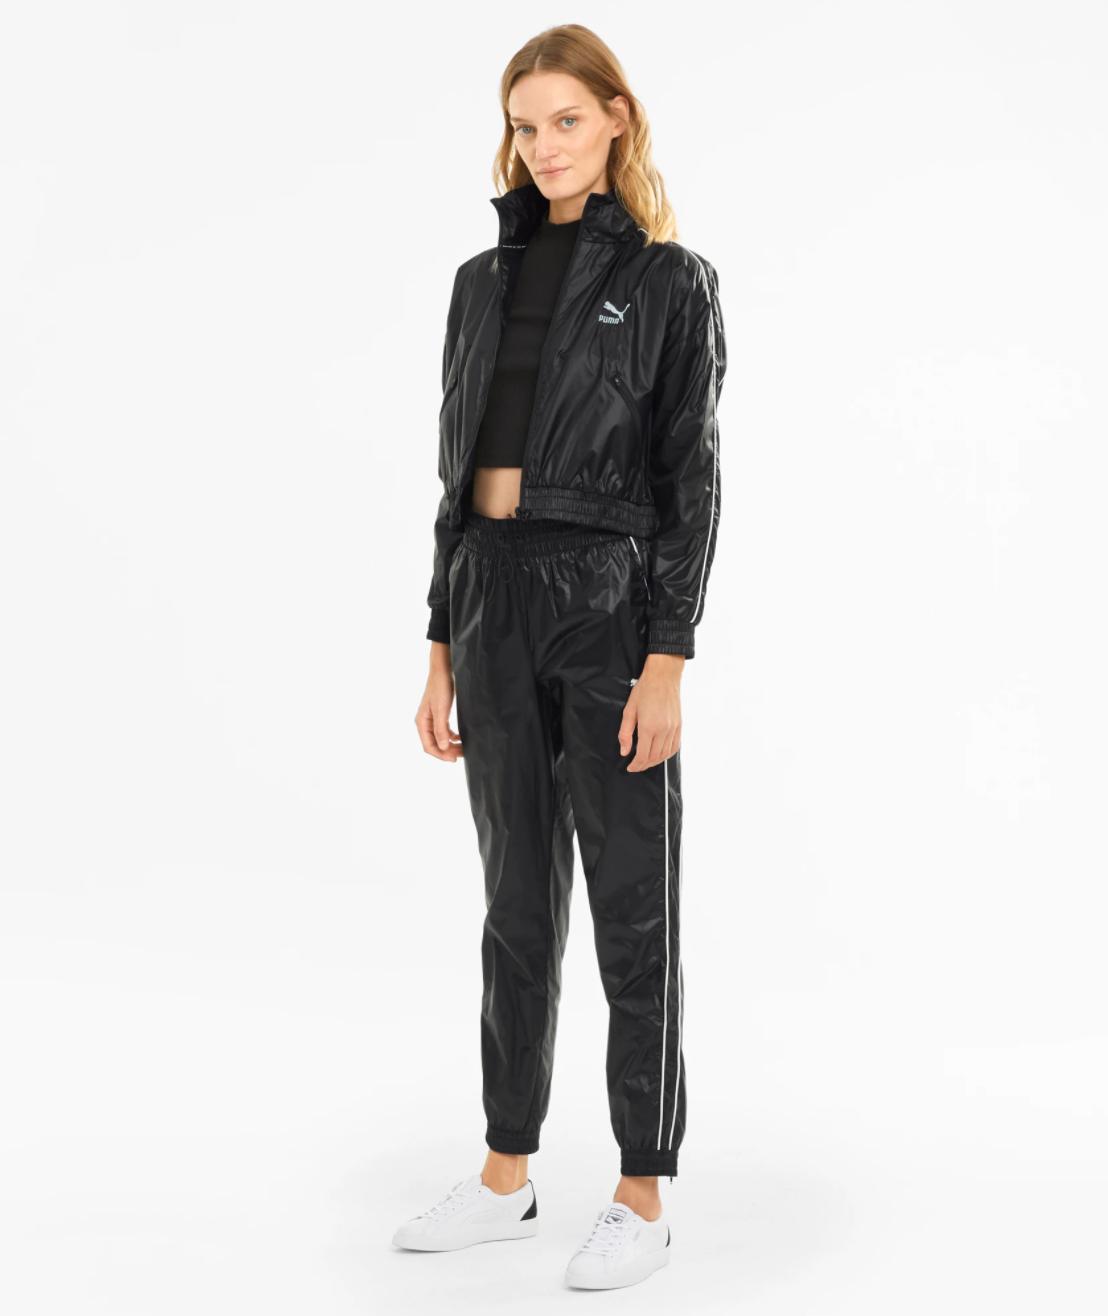 Tracksuits Are Trending — Here Are 13 Sets To Get You Started